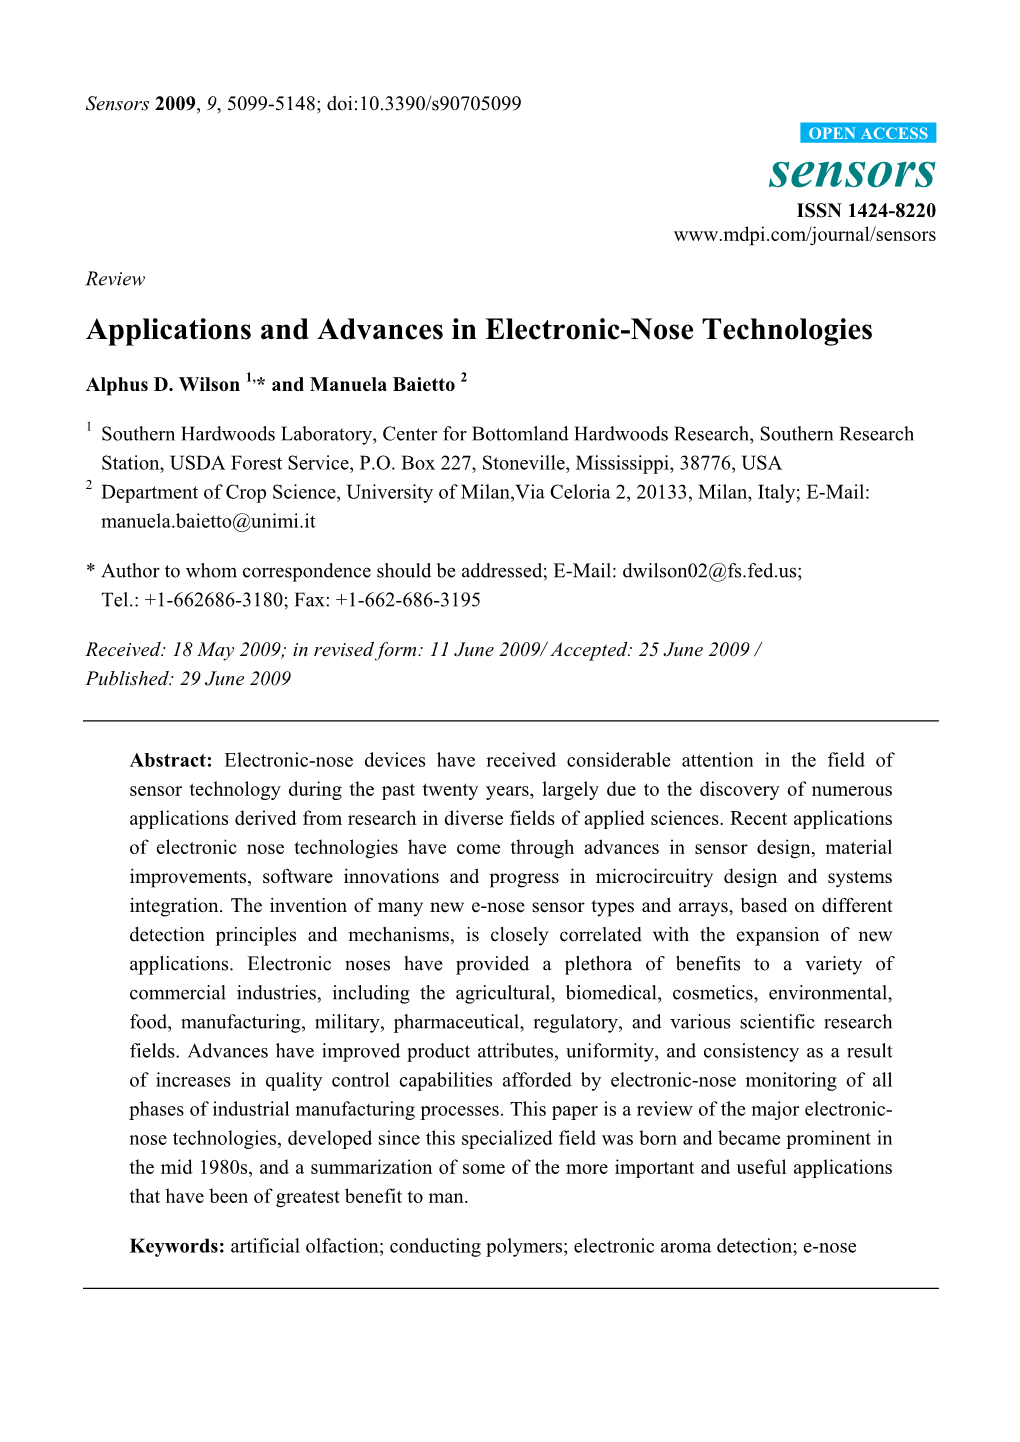 Applications and Advances in Electronic-Nose Technologies